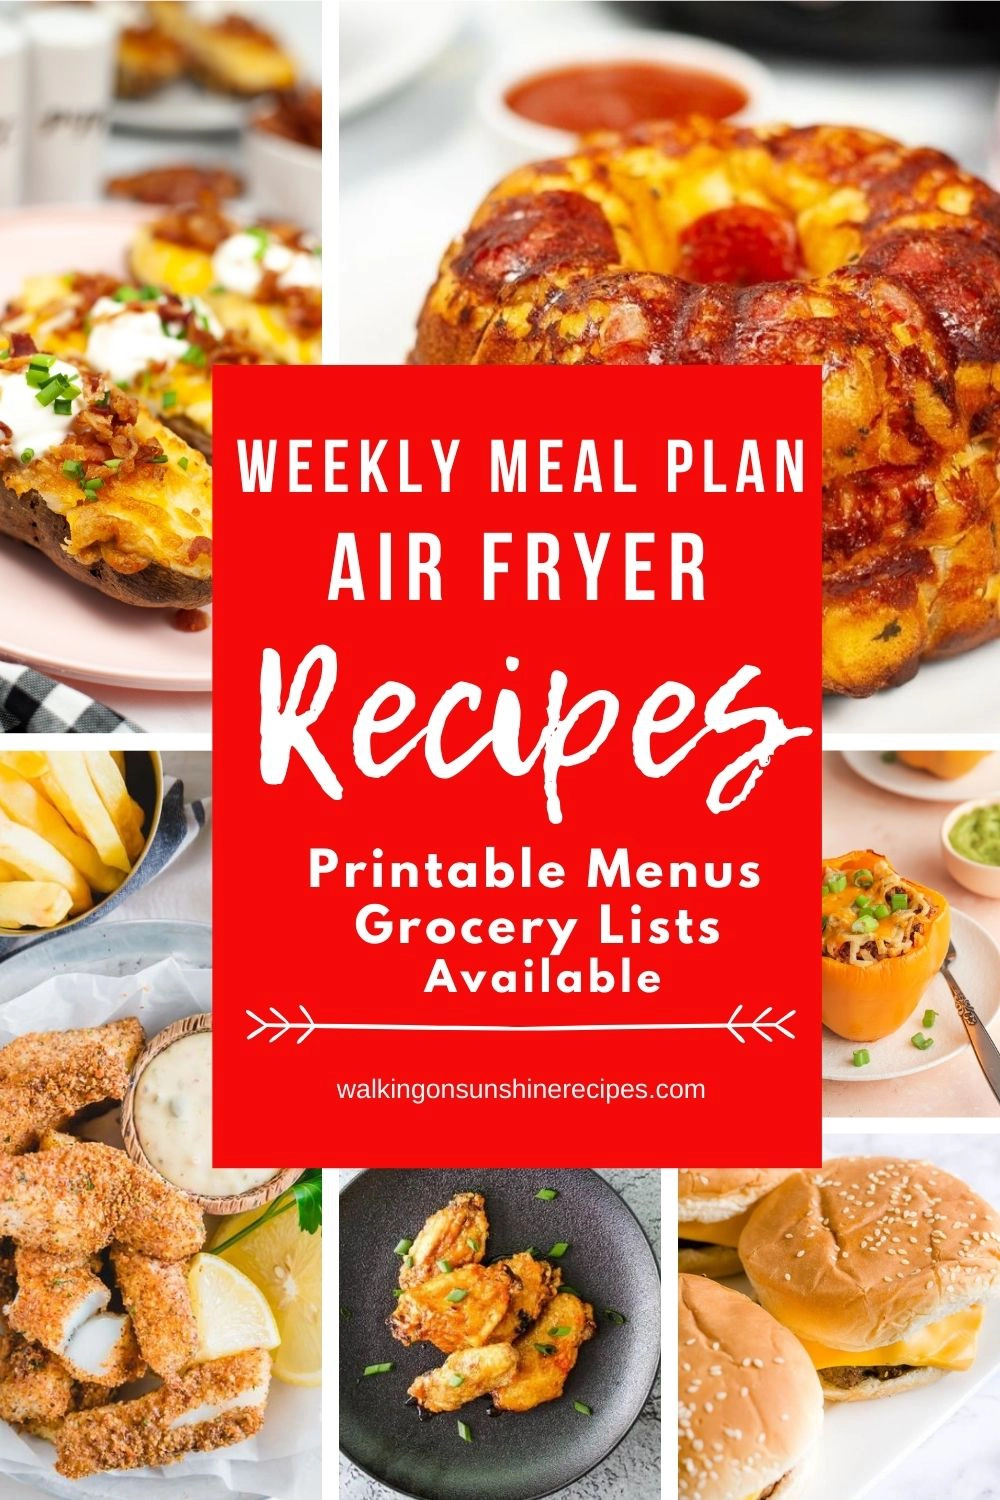 7 Air fryer recipes for a weekly meal plan.